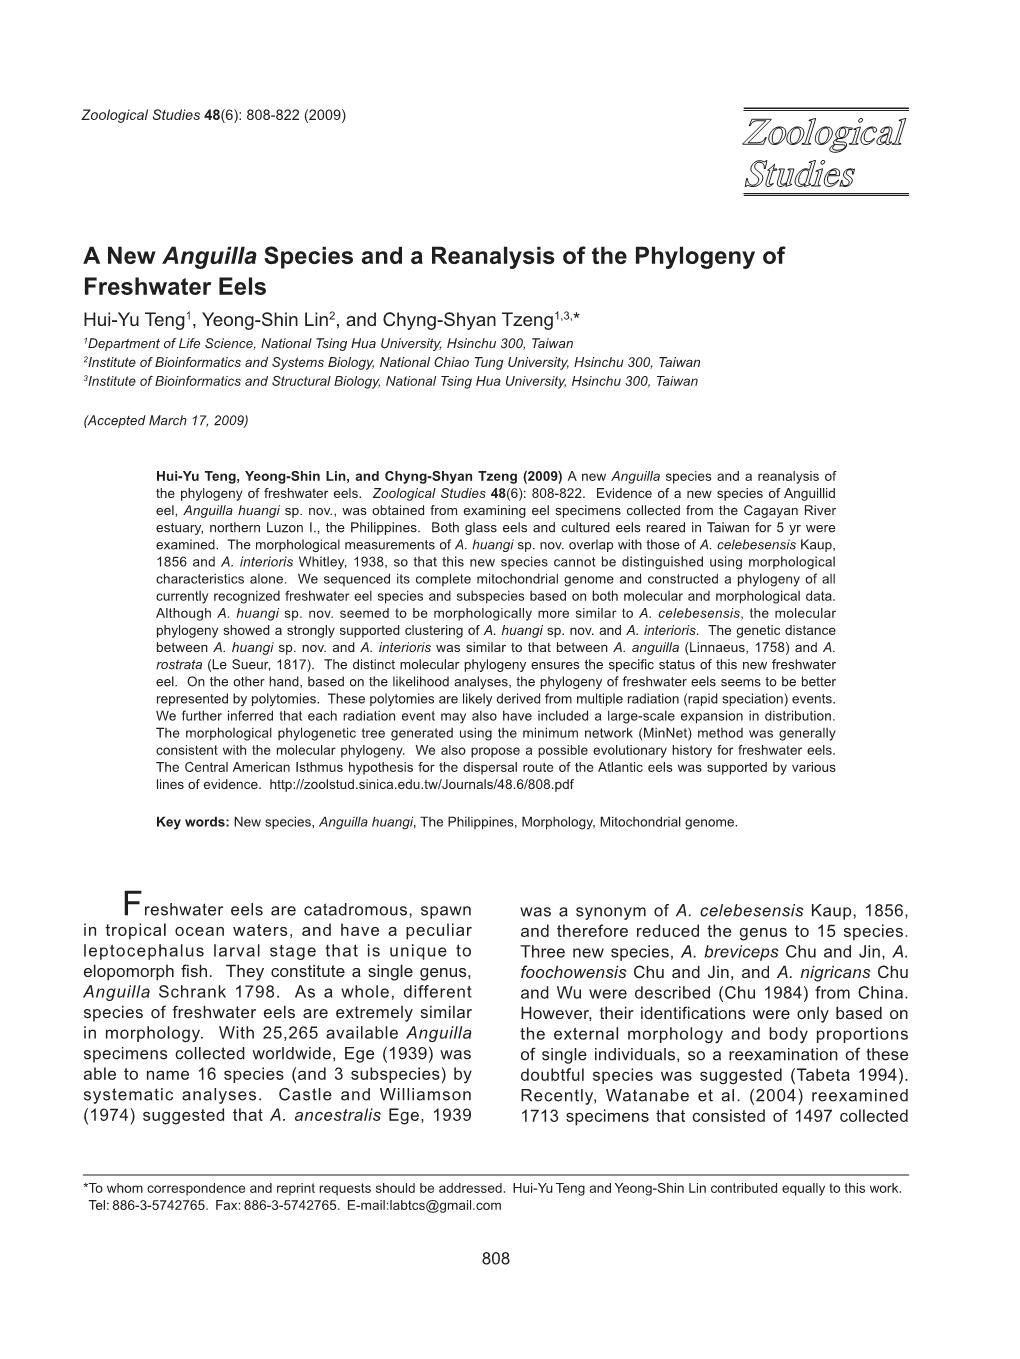 A New Anguilla Species and a Reanalysis of the Phylogeny Of